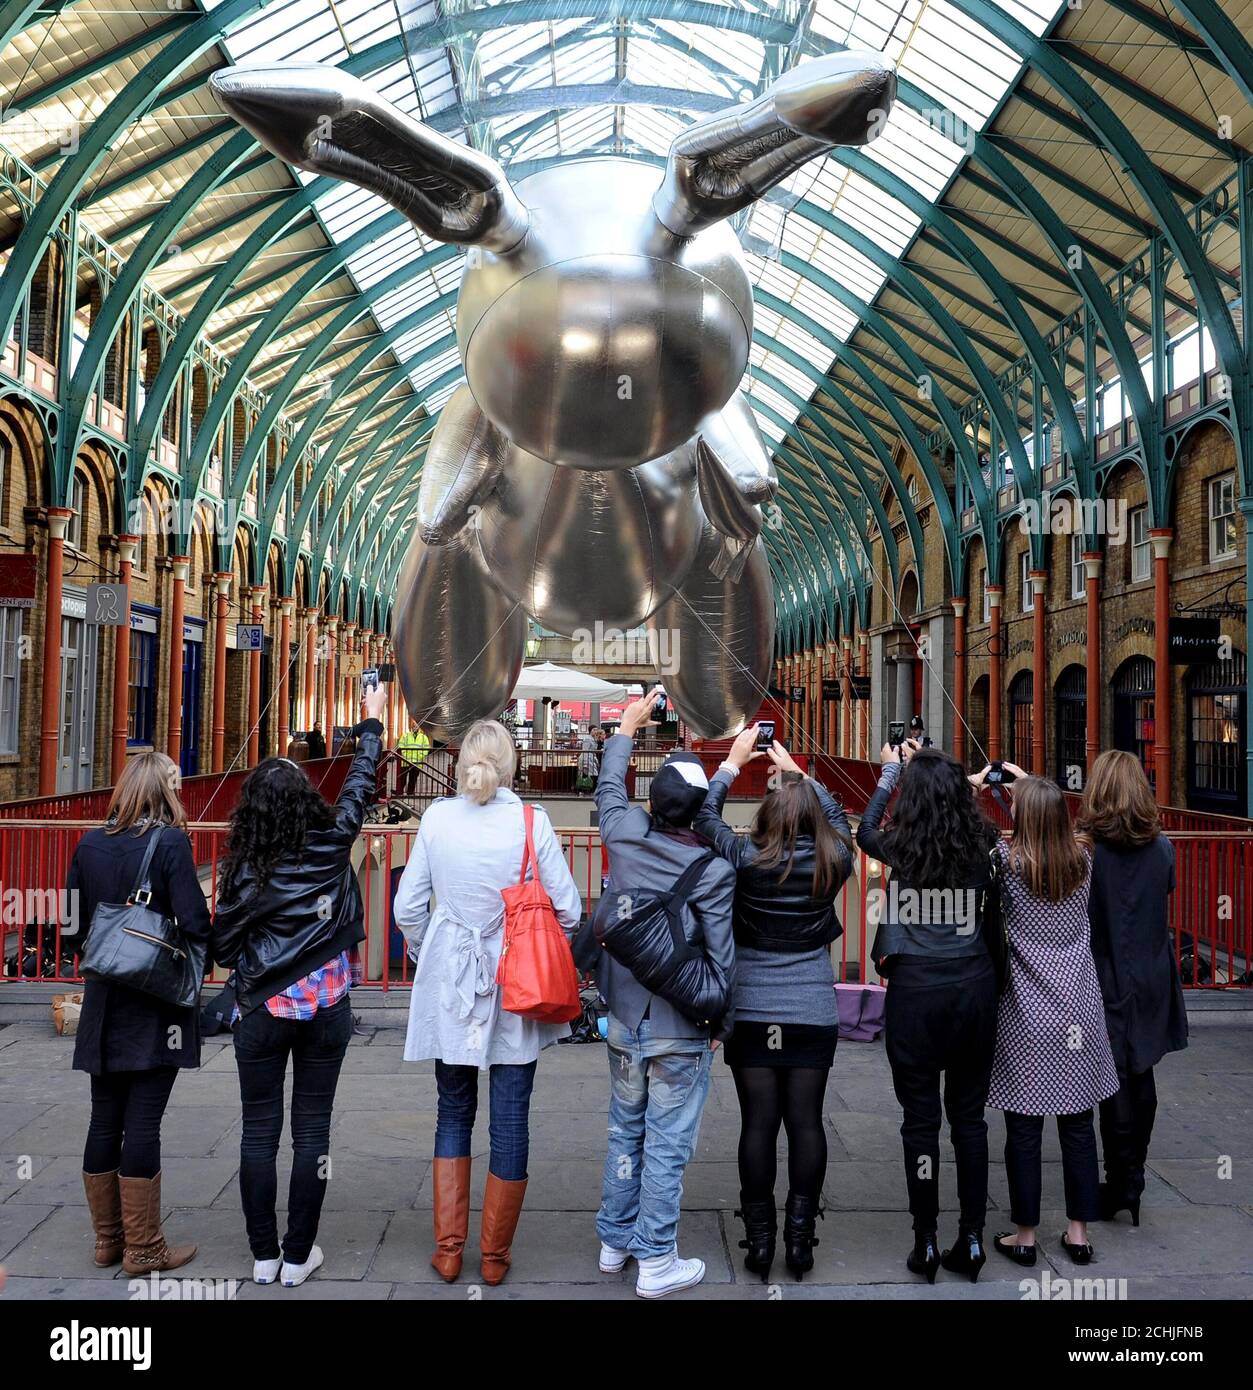 Artist Jeff Koons' giant 53 foot rabbit balloon is exhibited in Covent Garden Market to publicise Pop Life: Art in a Material World at Tate Modern, London. Stock Photo